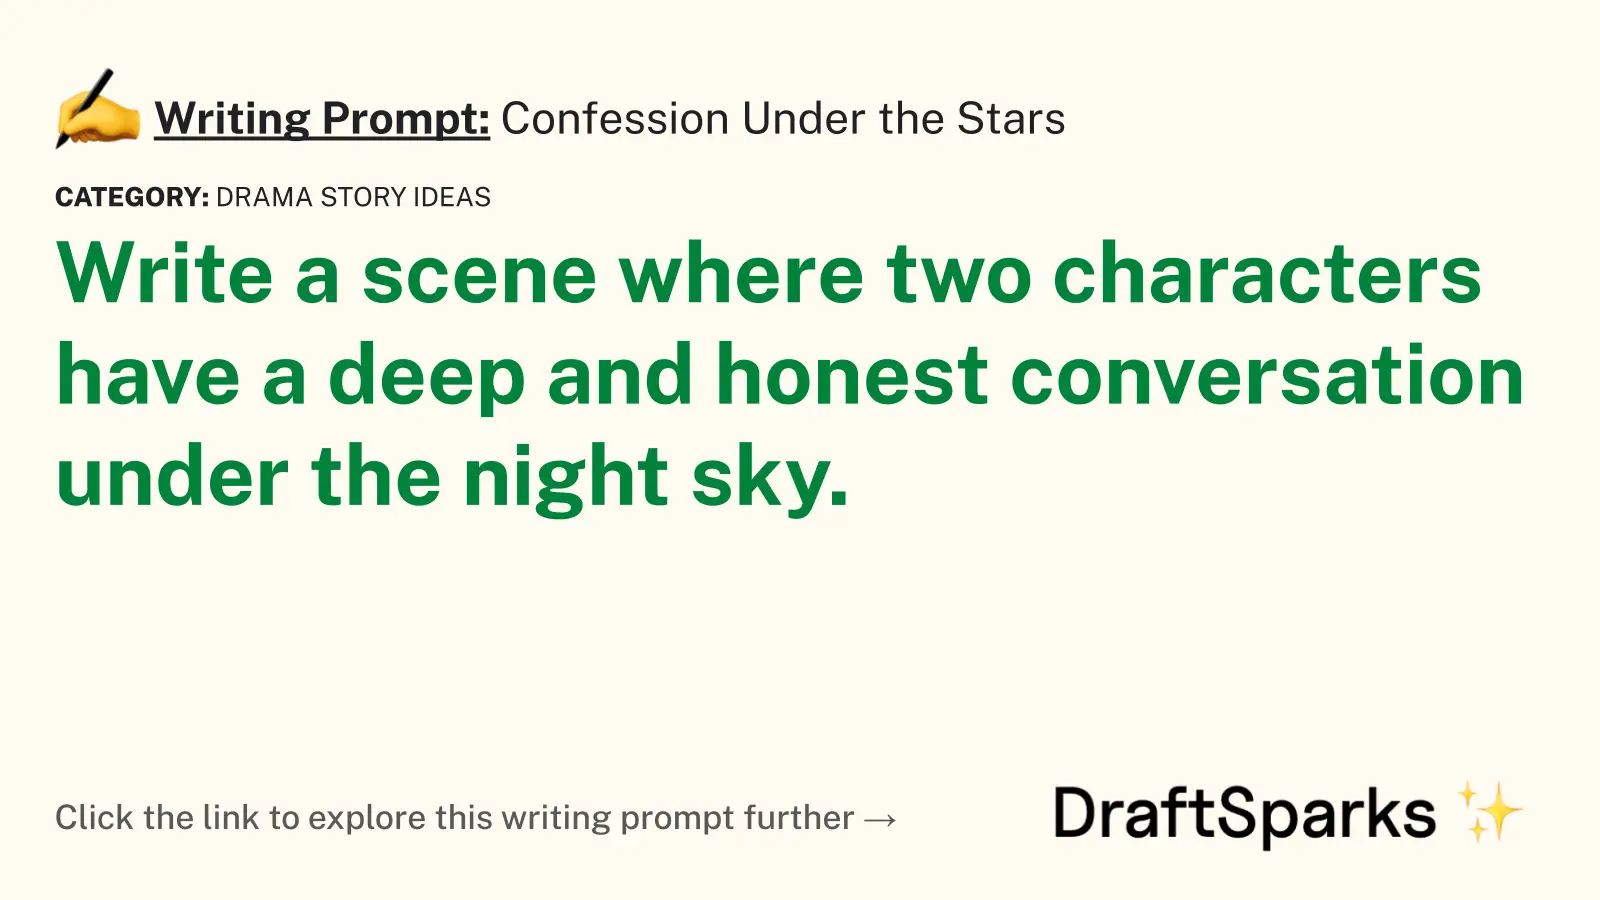 Confession Under the Stars